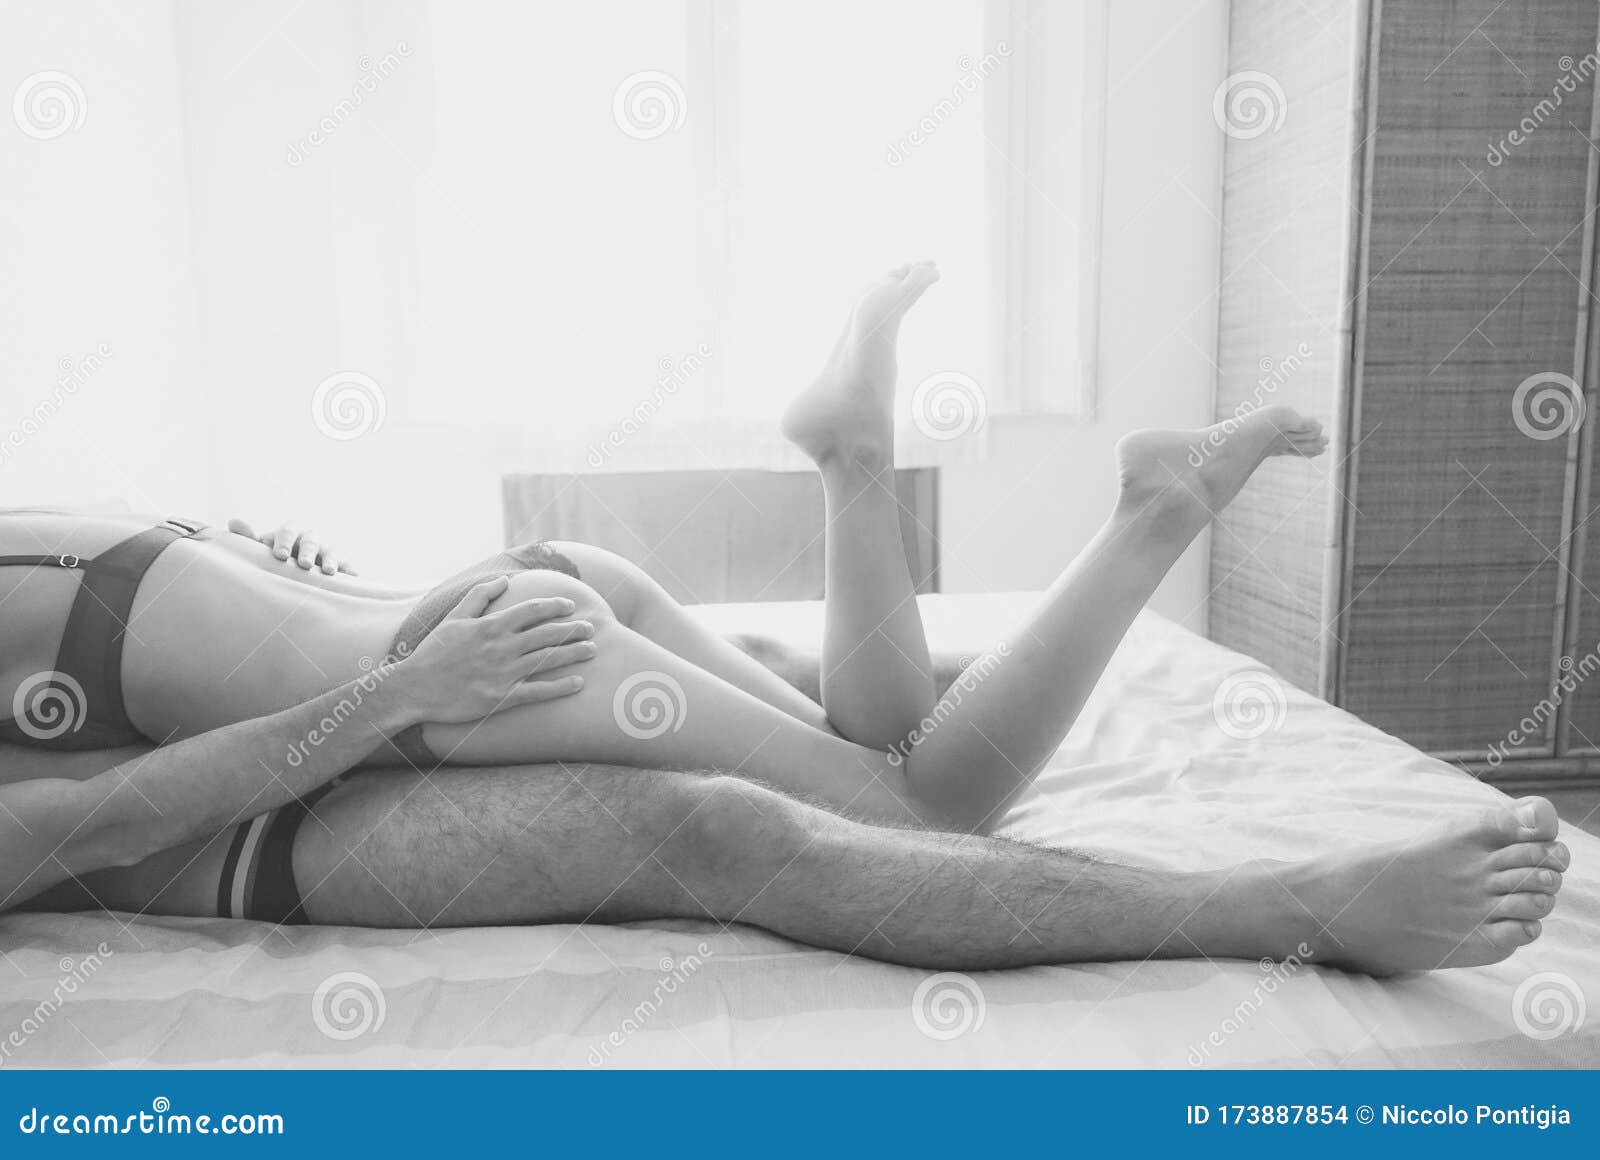 Legs View of Two Lovers before Sex - Passionate Couple Having Sexual Moments Inside Bedroom - Love and Sexuality,sentimental Stock Photo